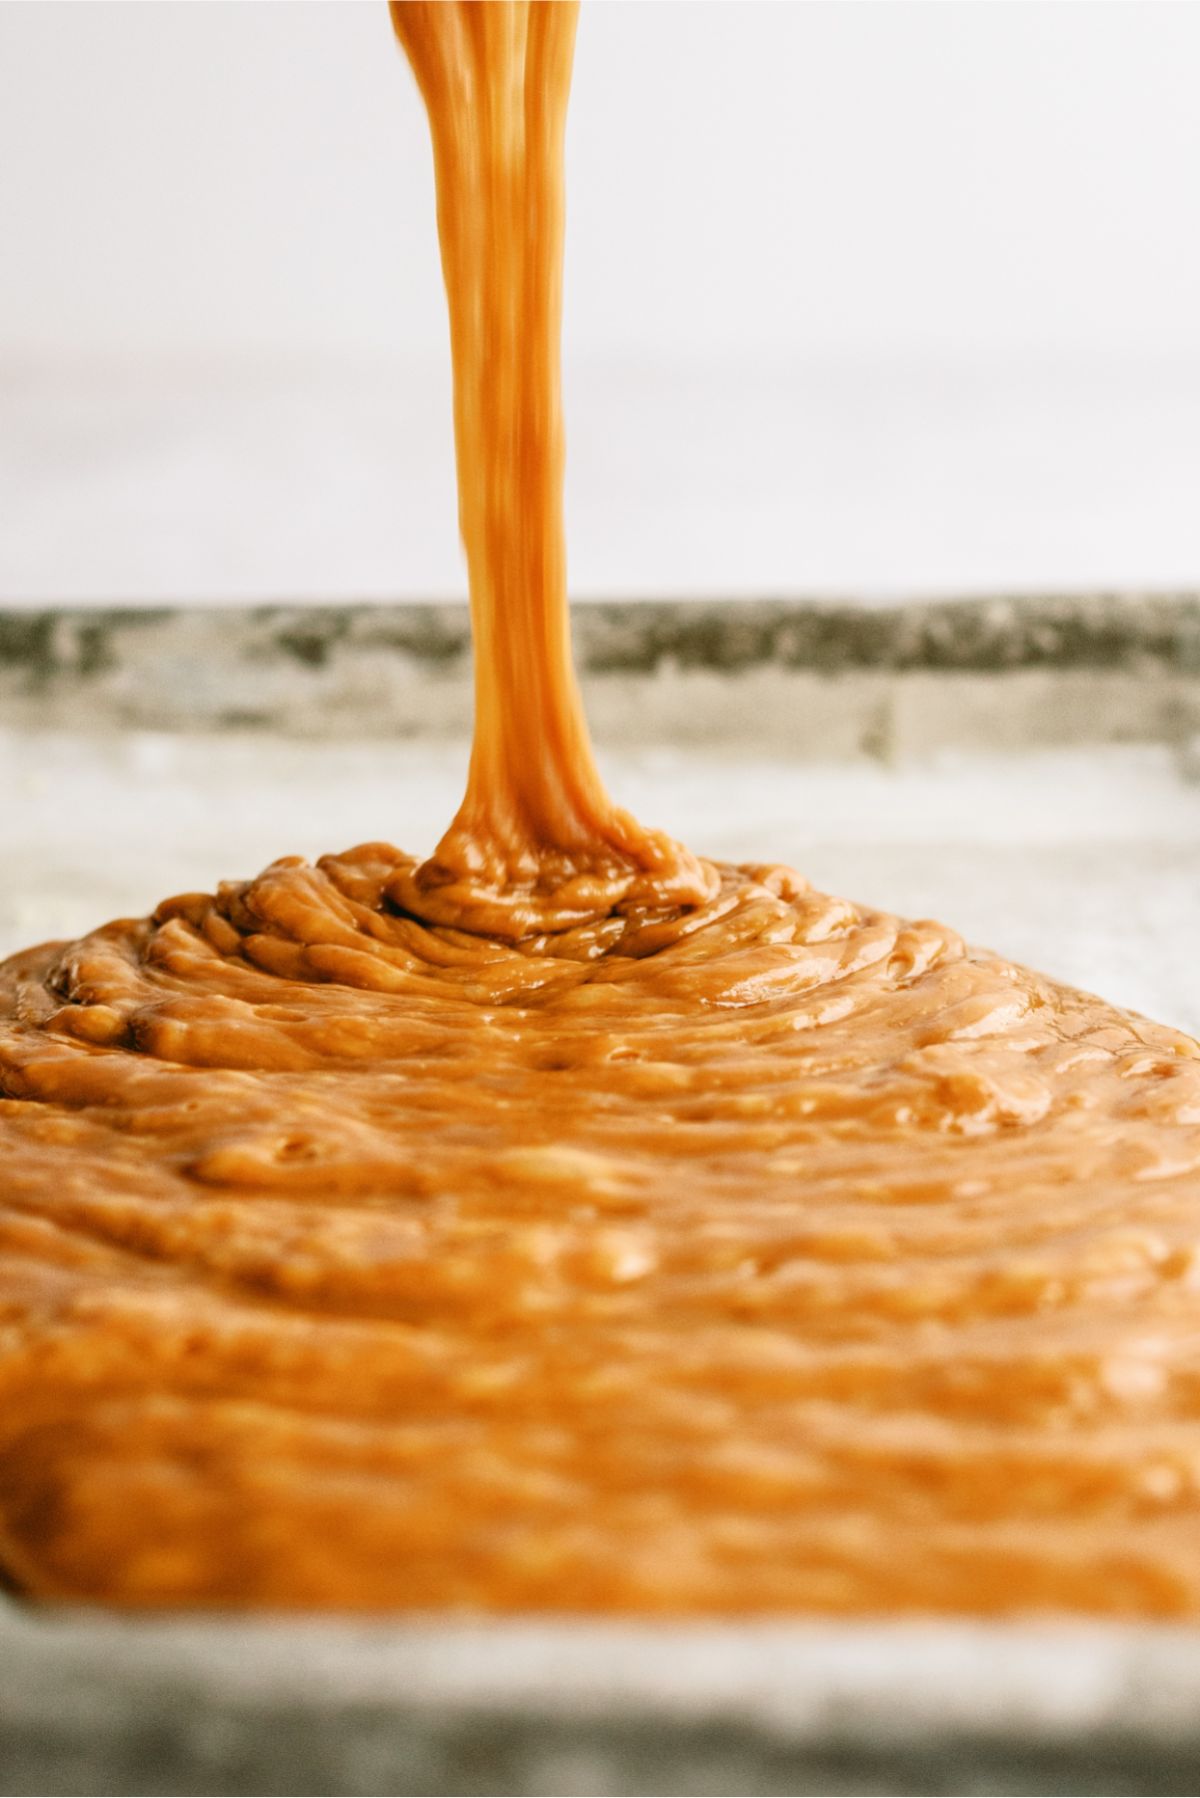 Pouring hot caramel mixture into a greased pan